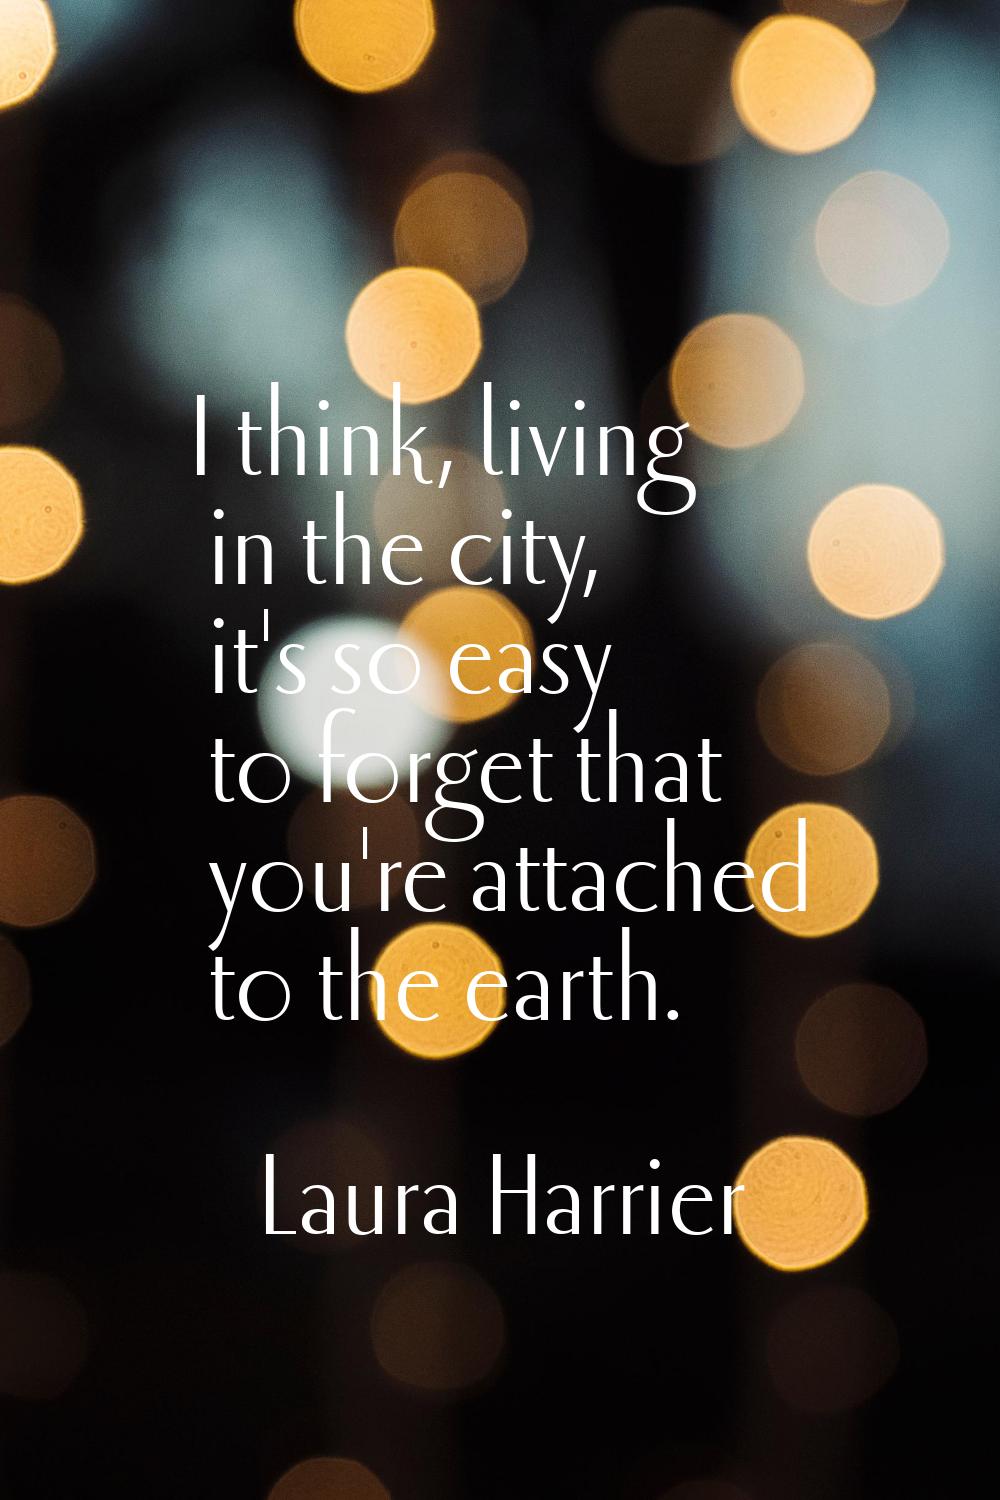 I think, living in the city, it's so easy to forget that you're attached to the earth.